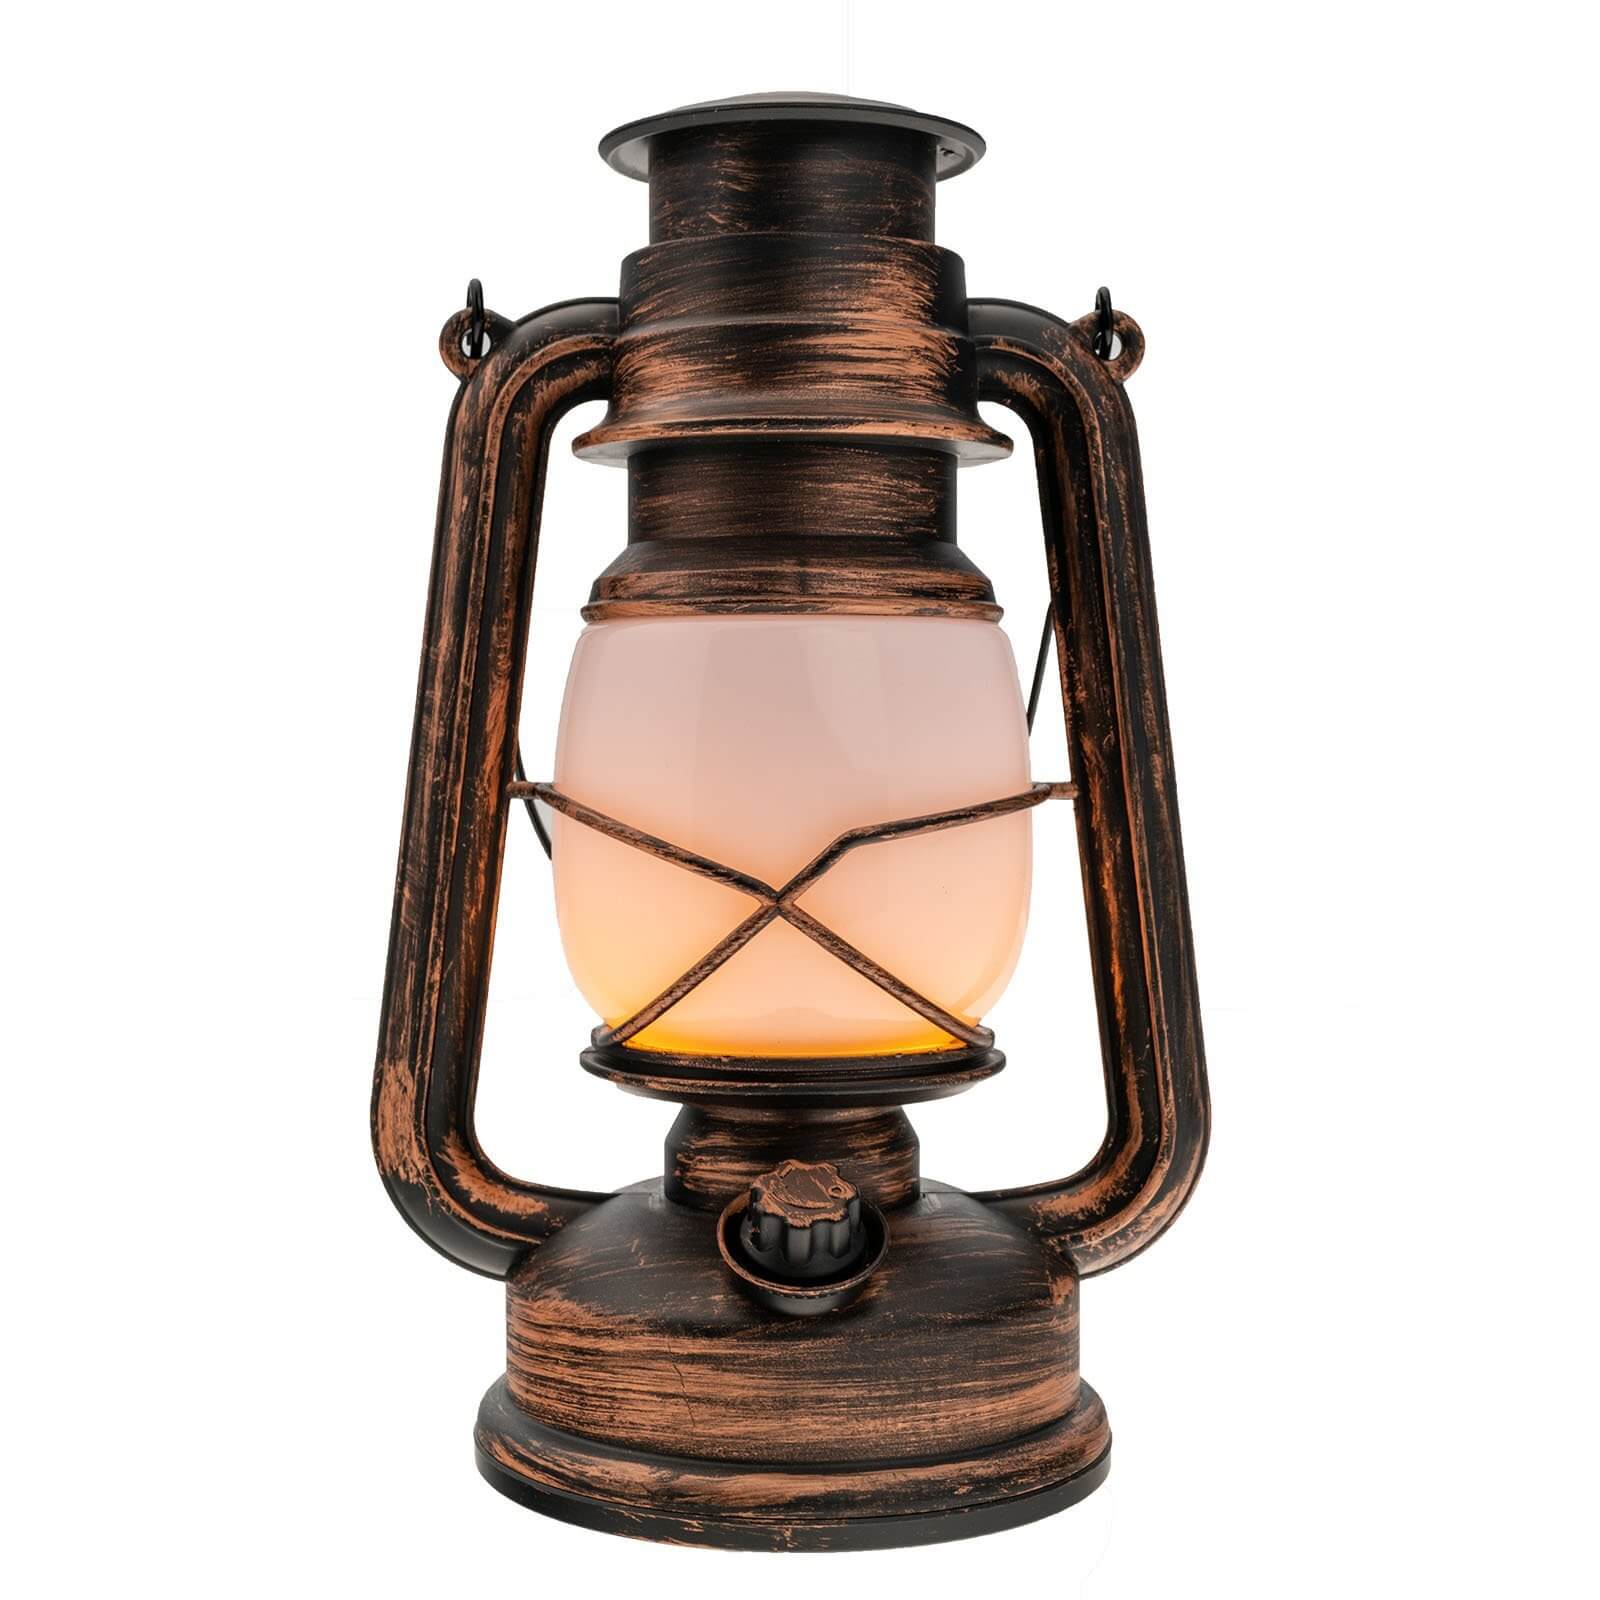 LitezAll Resin Vintage Lantern with Dual Light Modes and Dimmer